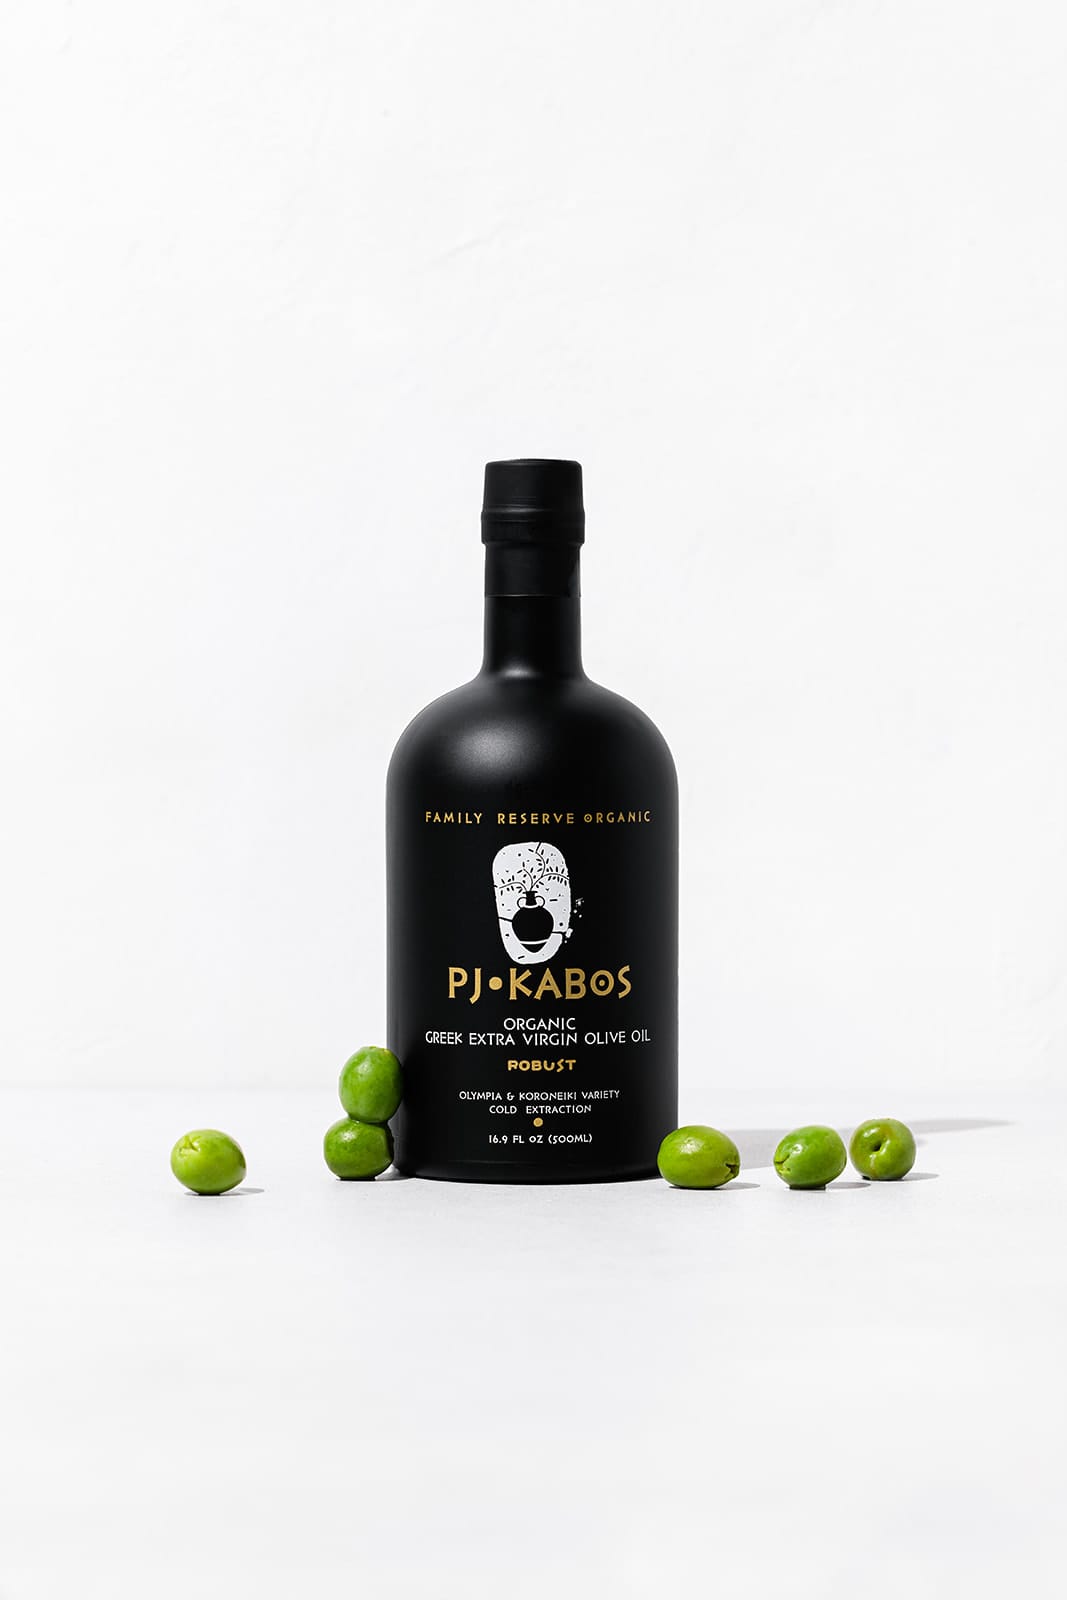 An elegant black bottle of  PJ KABOS Family Reserve Organic - Robust, extra virgin olive oil: a high phenolic oil that adds depth, character and great health benefits to every meal.